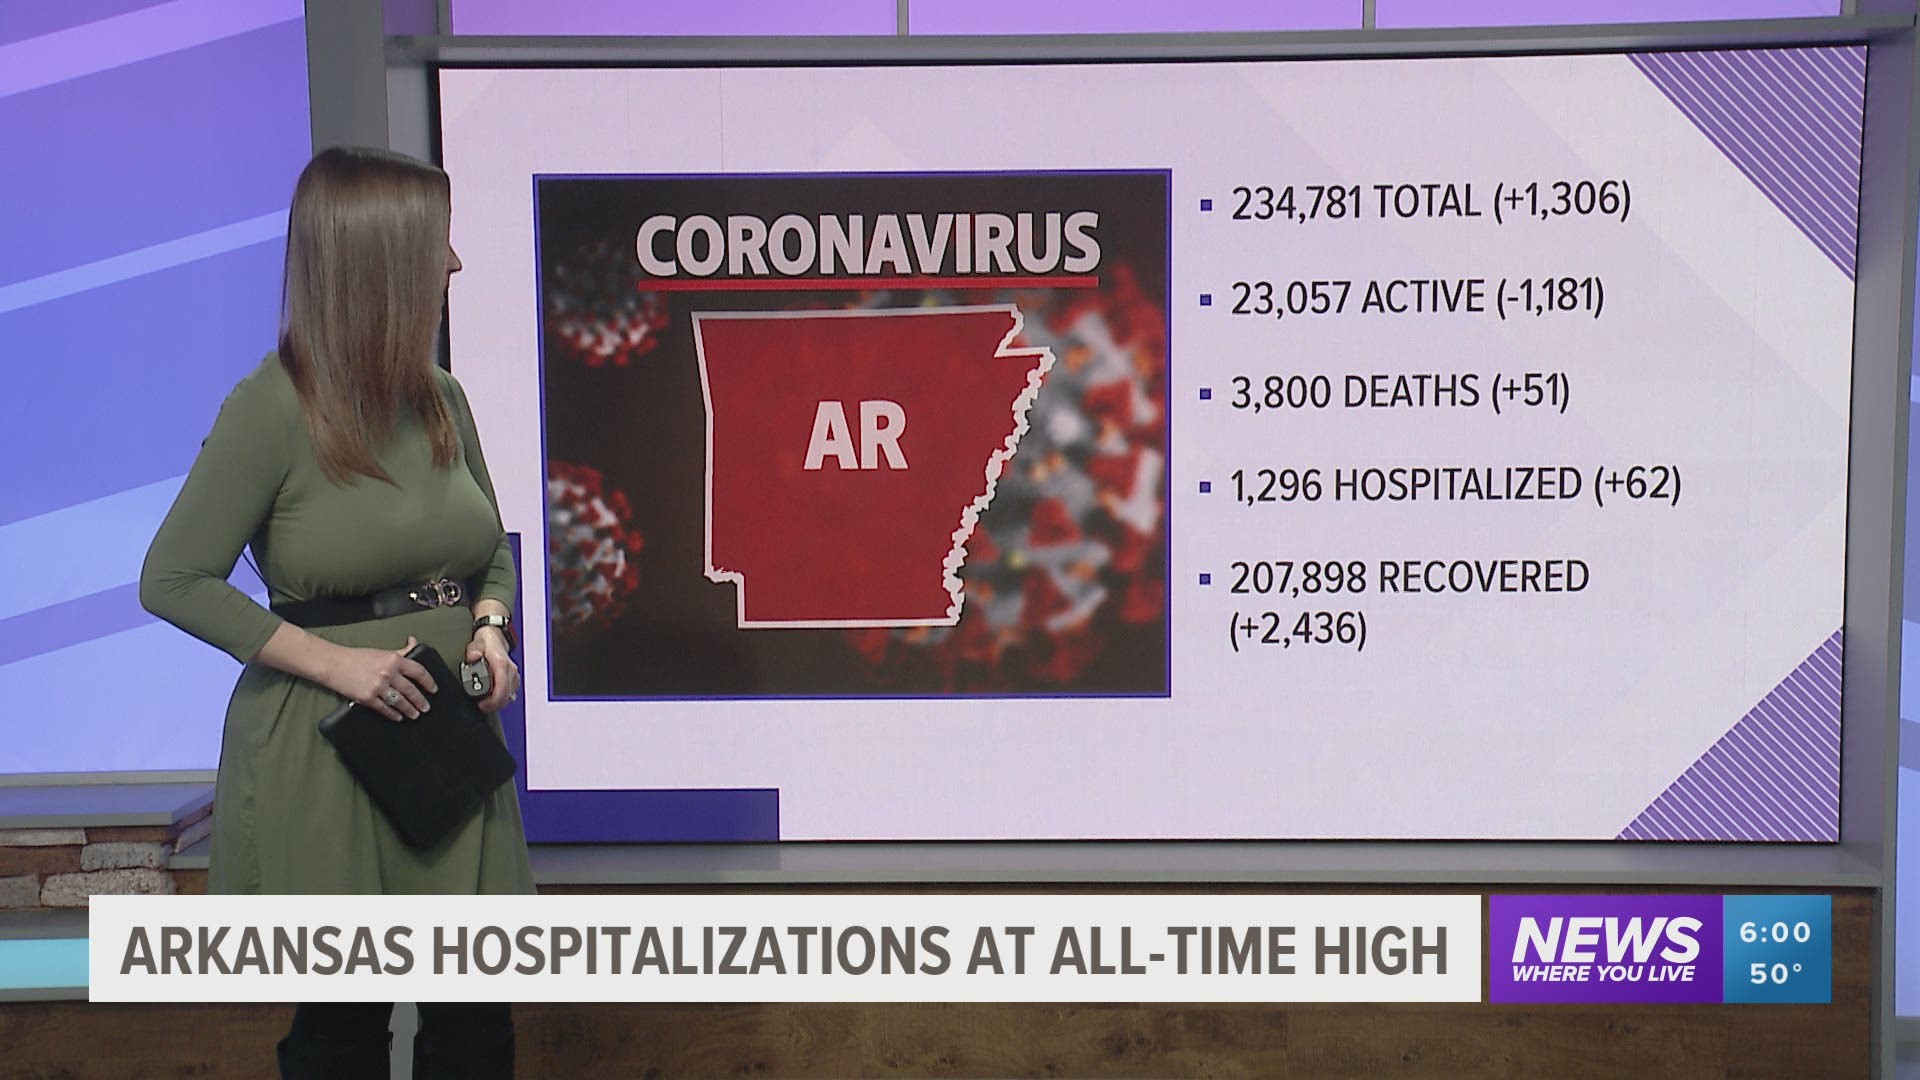 A look at the latest case numbers for the coronavirus in Arkansas on Monday, January 4. https://bit.ly/2Uygy5V